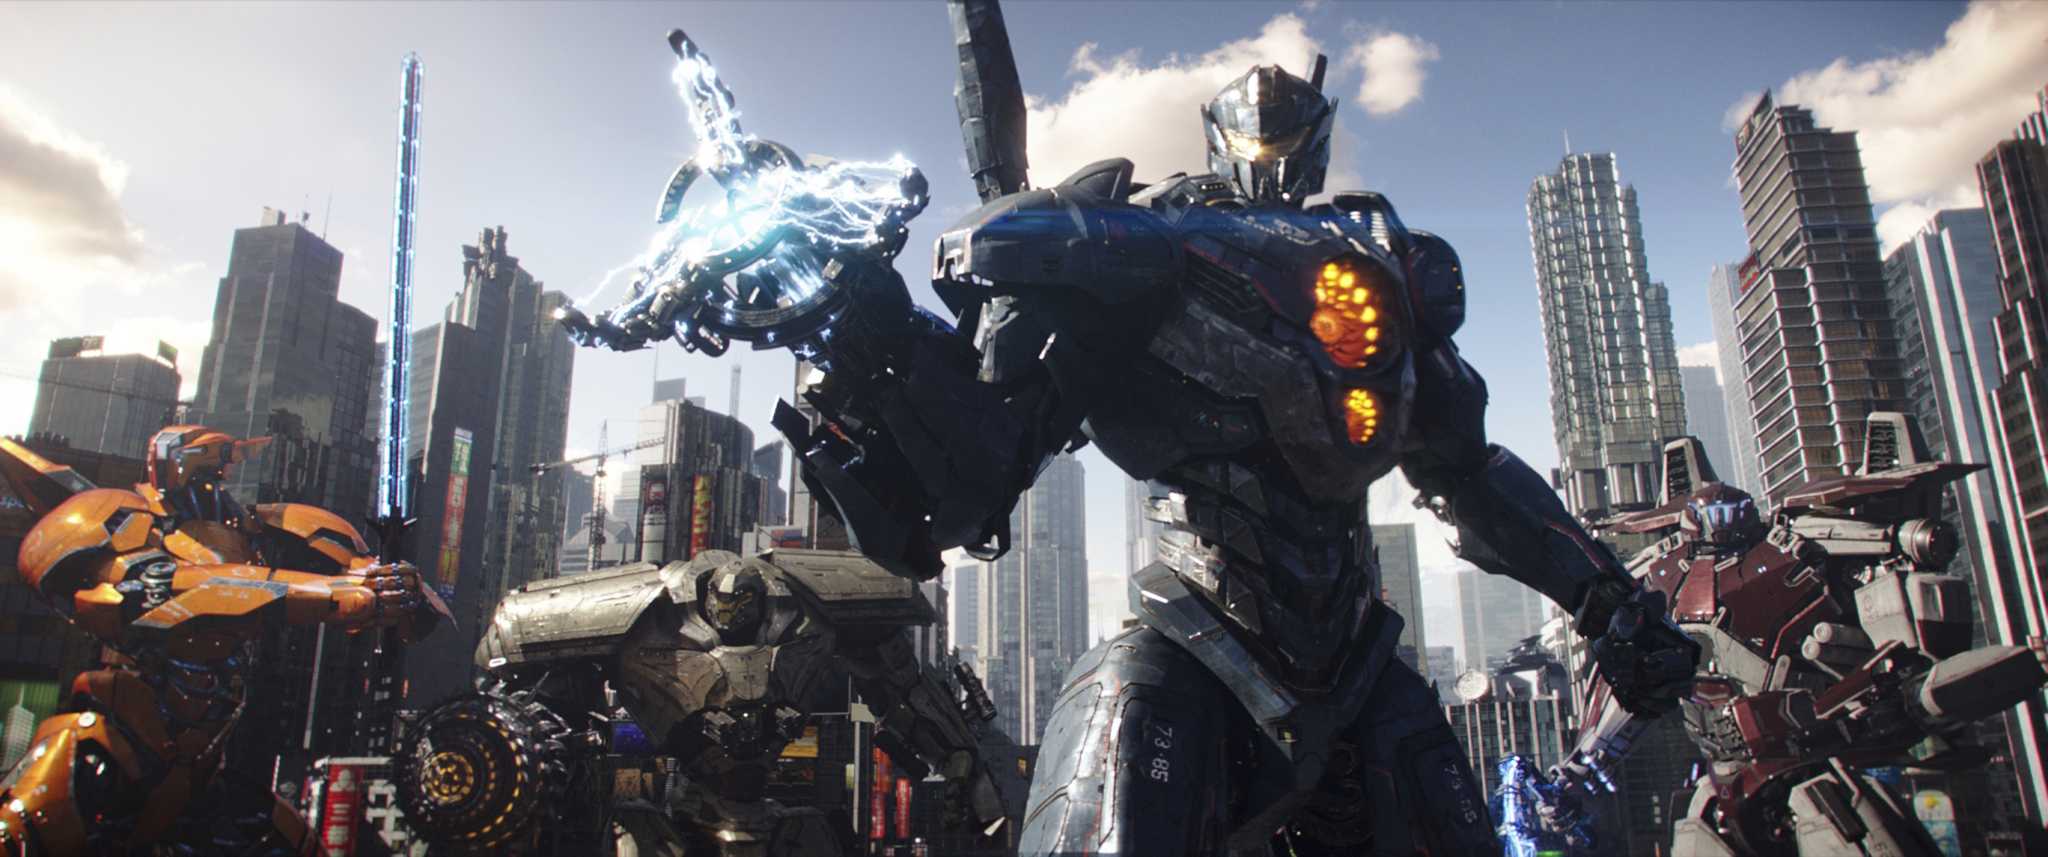 Netflix’s Pacific Rim Anime To Premier in 2020